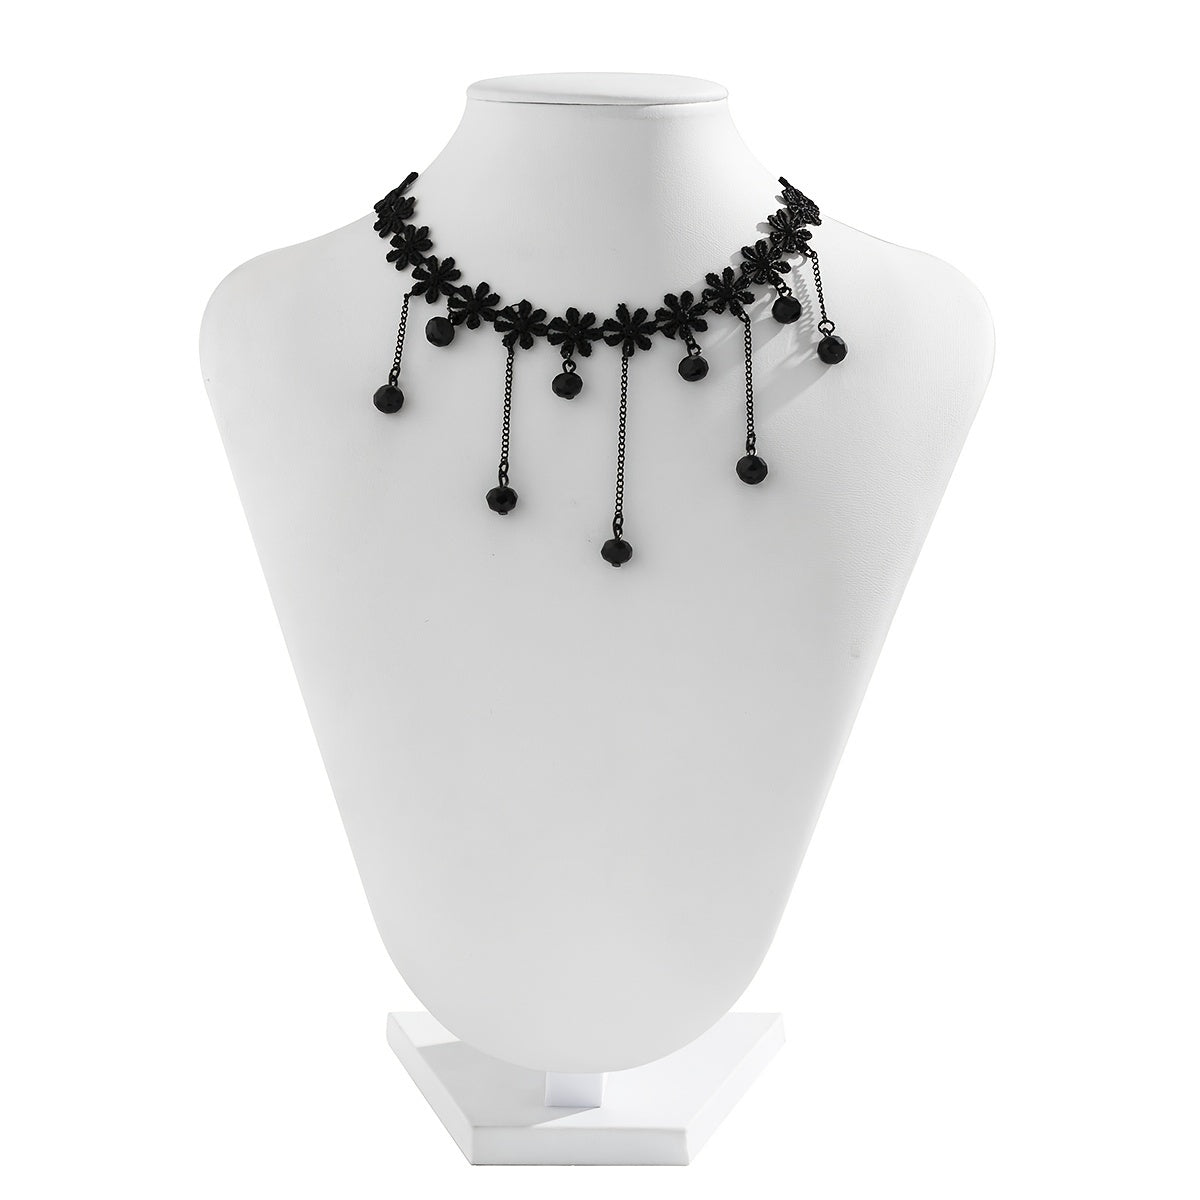 Gorgeous Flower-Shaped Lace Choker Necklace - Perfect for Cosplay Lovers!